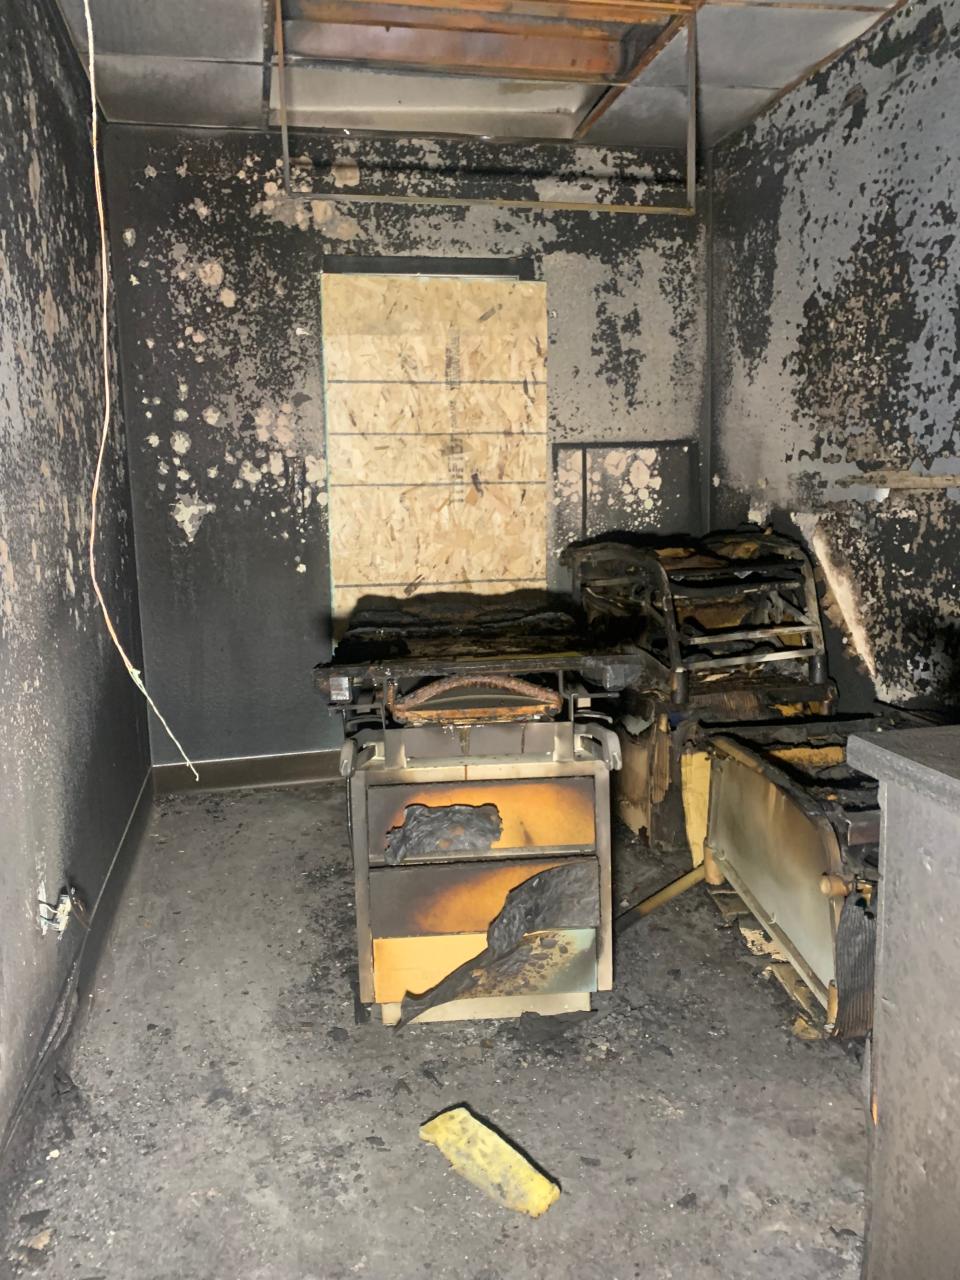 The fire in May 2022 at Wellspring Health Access clinic caused "significant" damage, investigators said. The woman who set the fire, Lorna Roxanne Green, pleaded guilty to a felony arson charge.